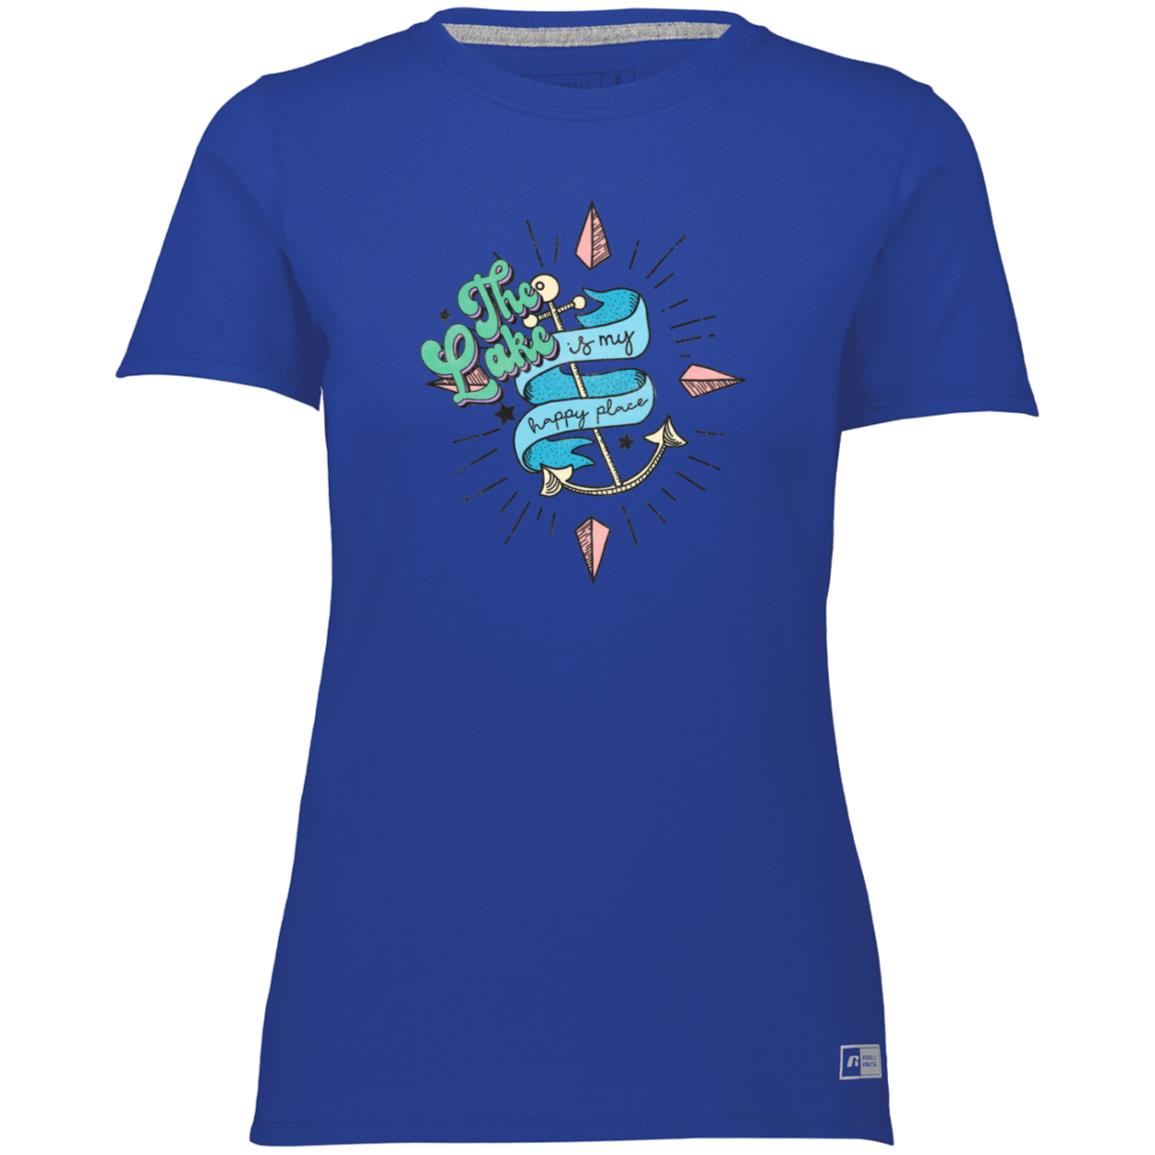 The Lake is My Happy Place HRCL LL 2 Sided 64STTX Ladies’ Essential Dri-Power Tee